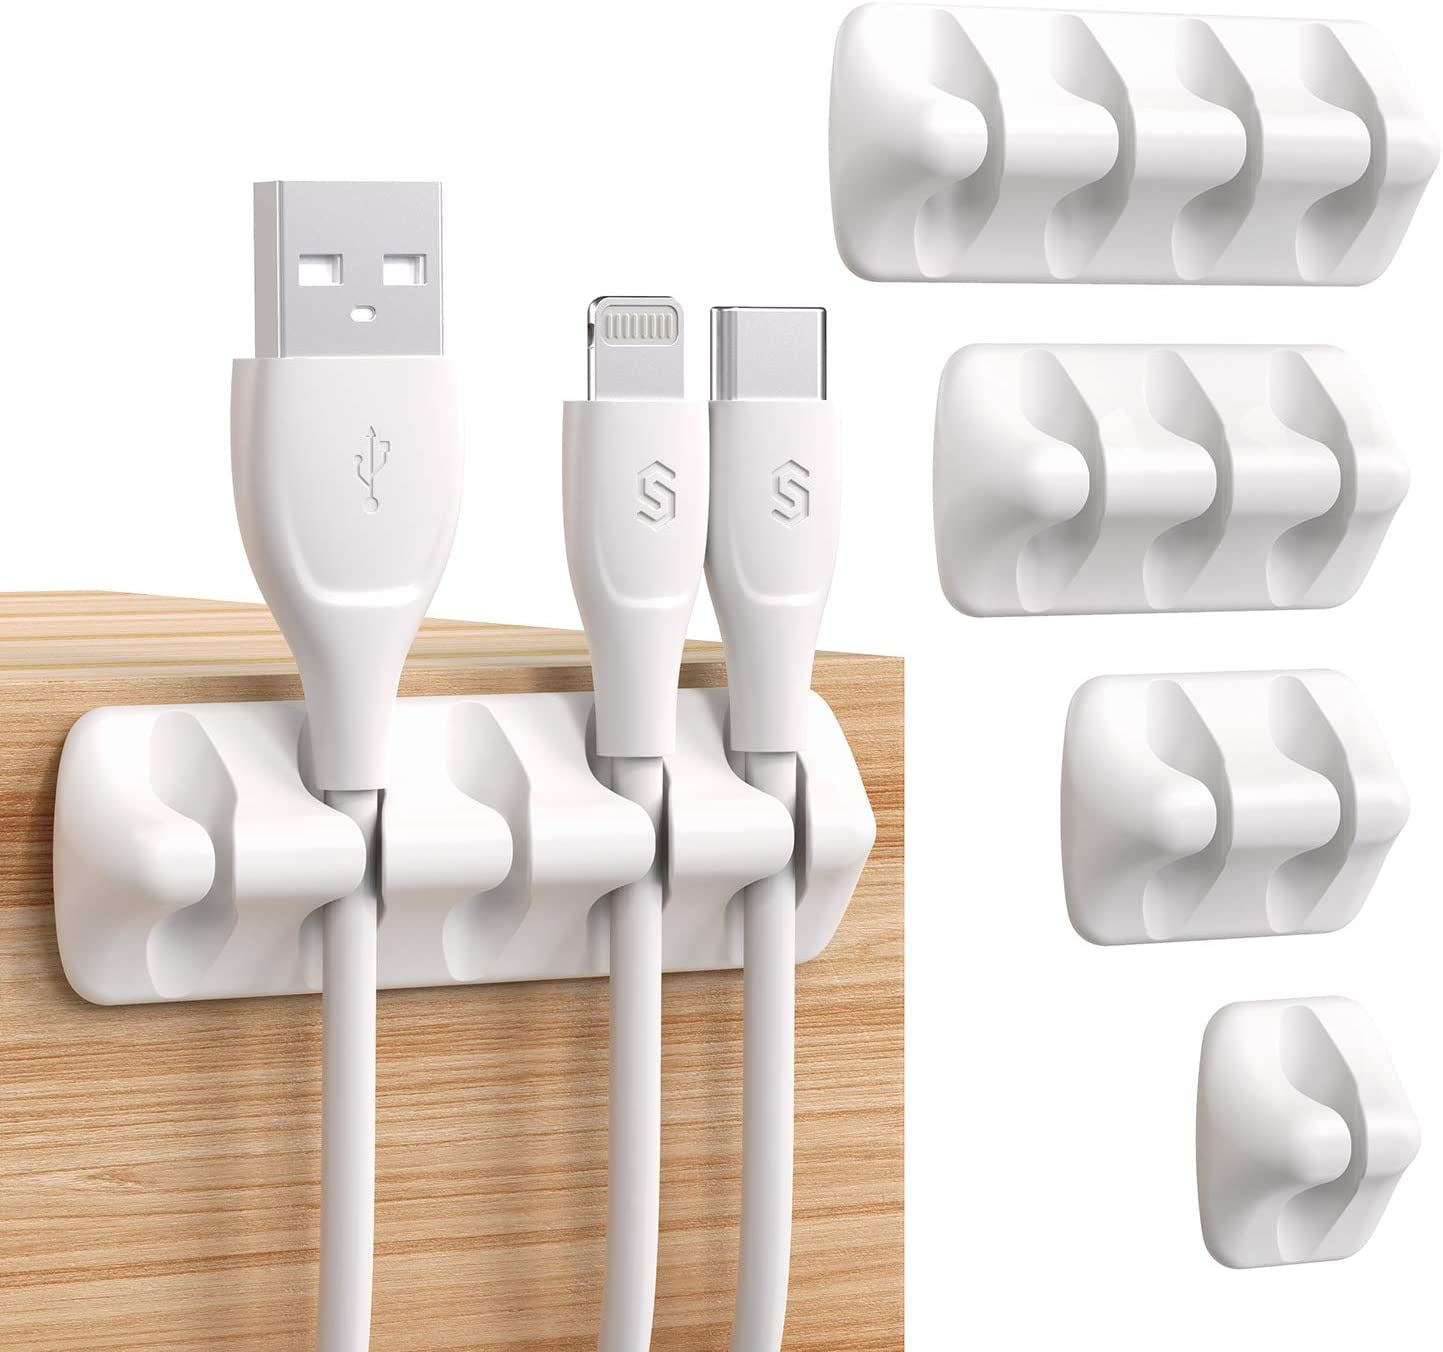 Syncwire Cable Clips Cord Holders Self Adhesive Cord Organizer Cable  Management for Desk, Home, Office - White